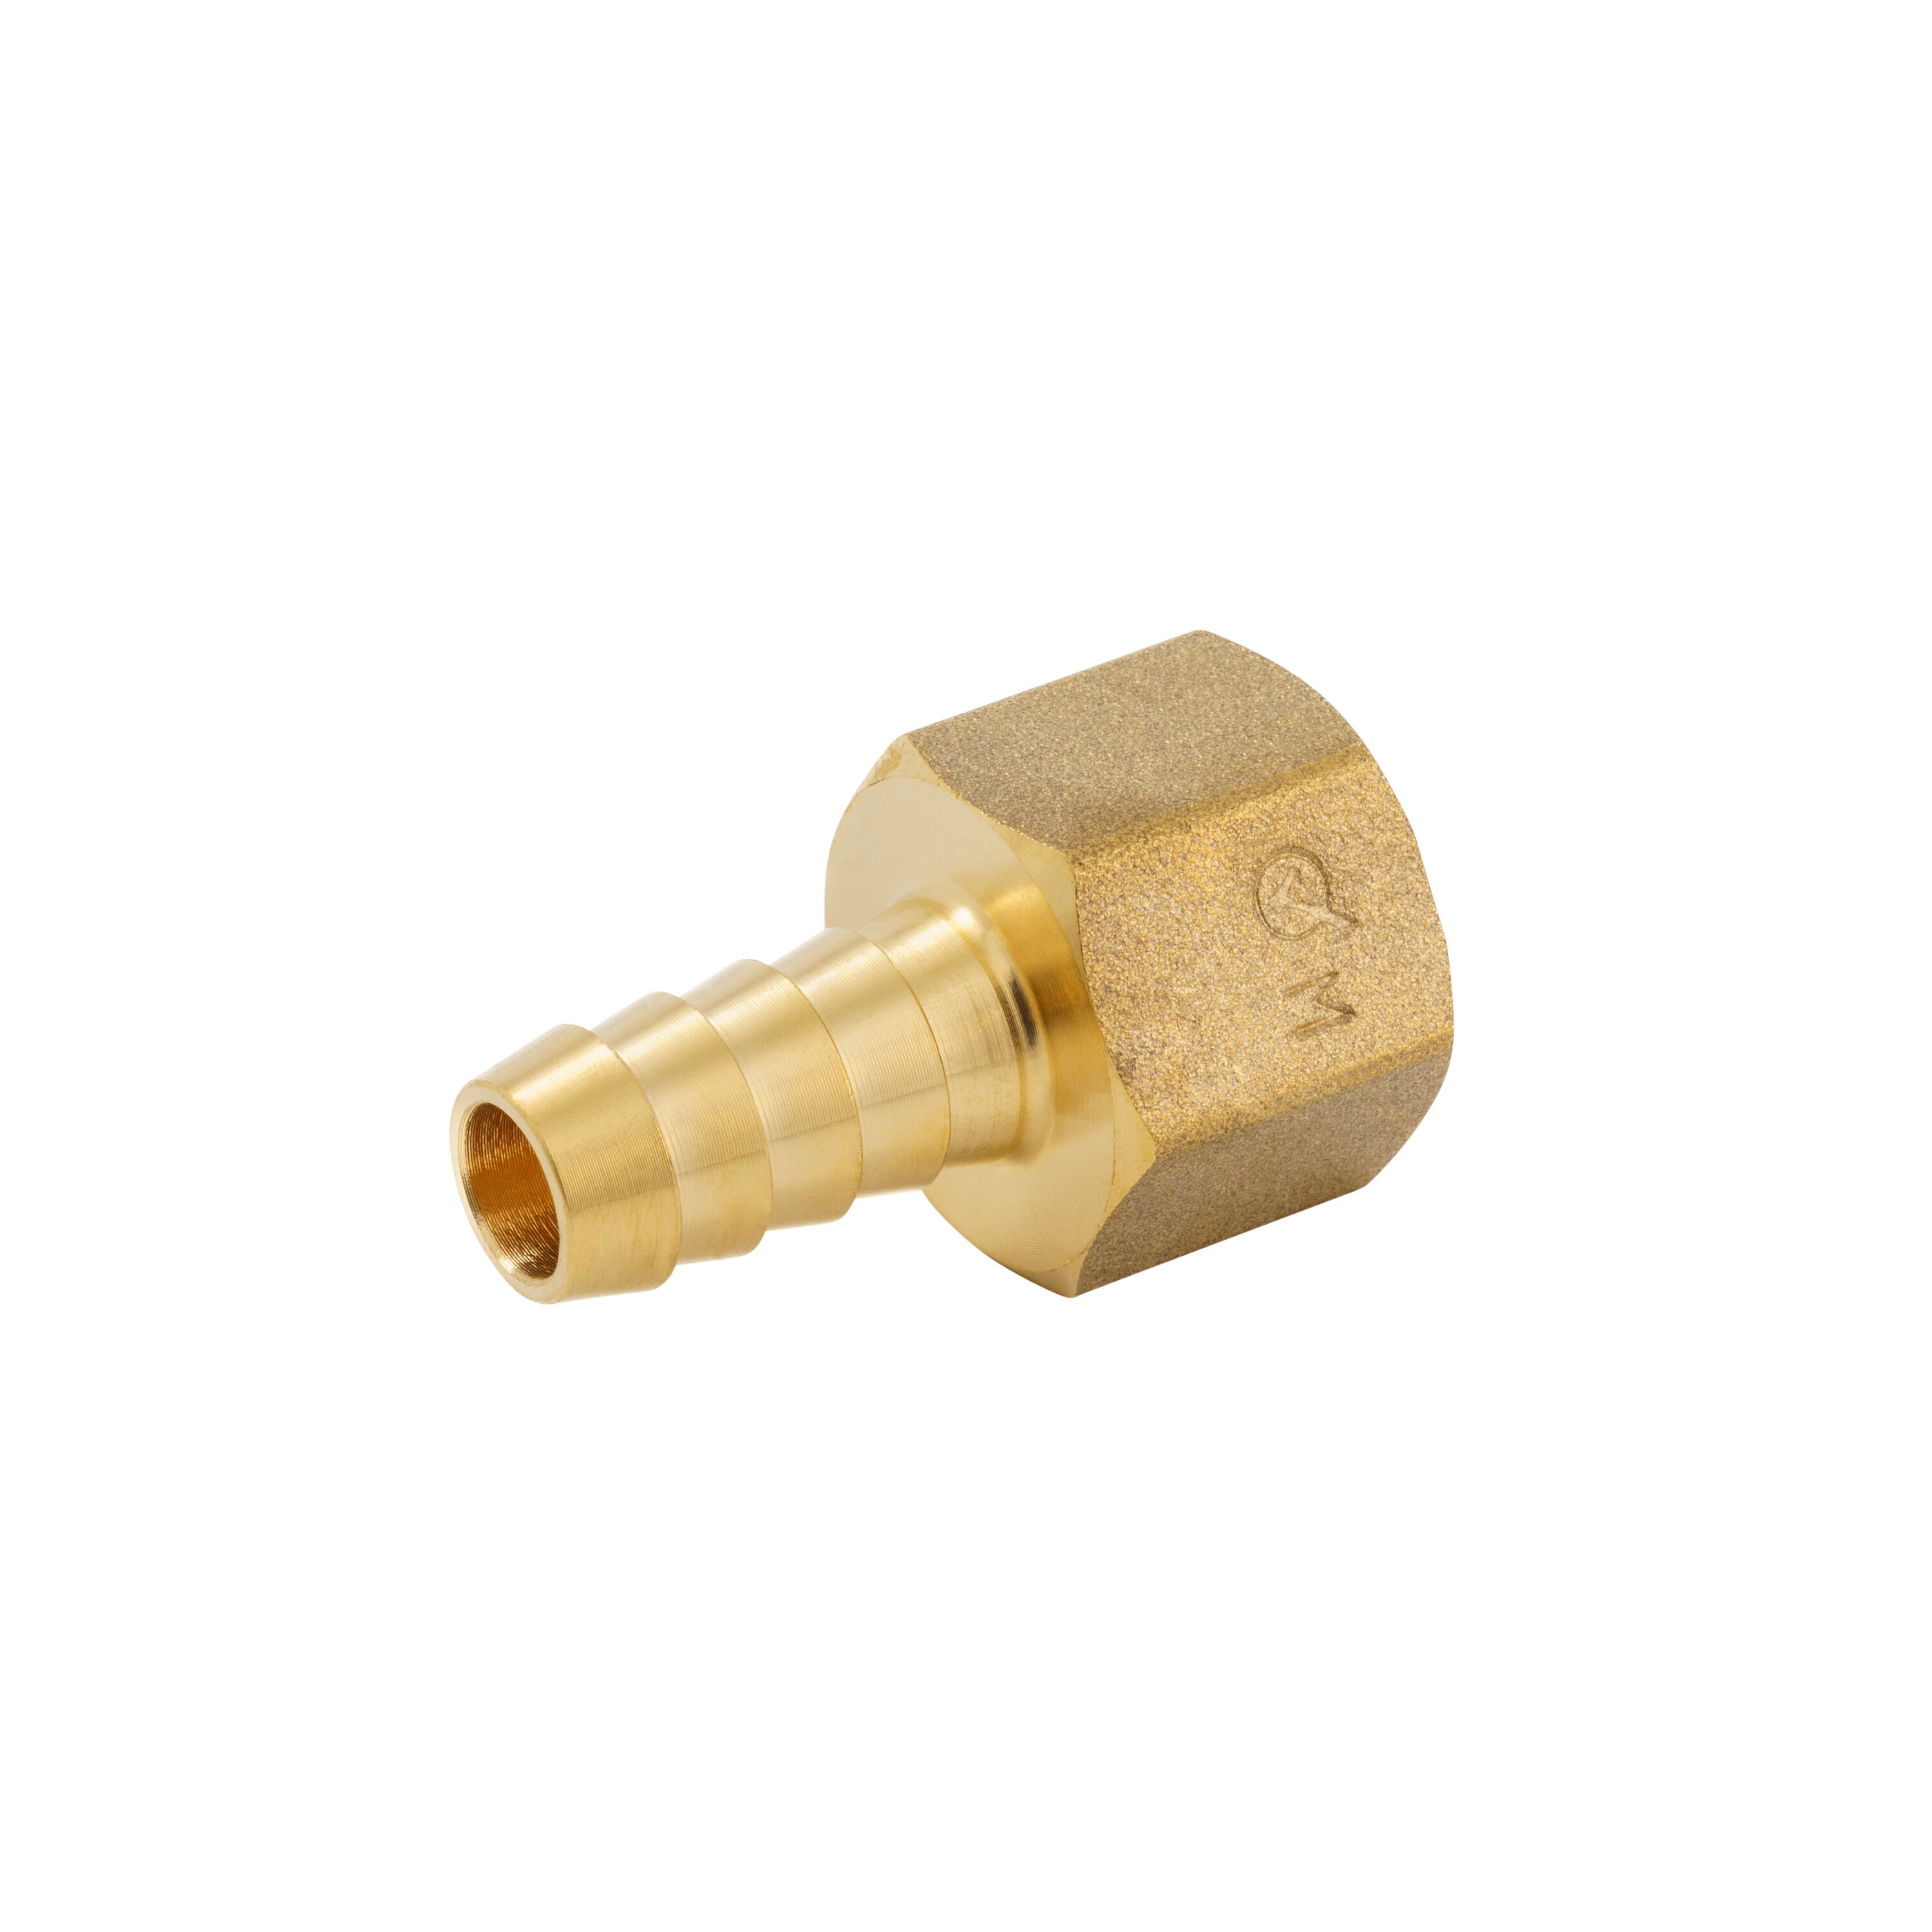 Proline Series 1/4-in x 3/8-in Compression Adapter Fitting